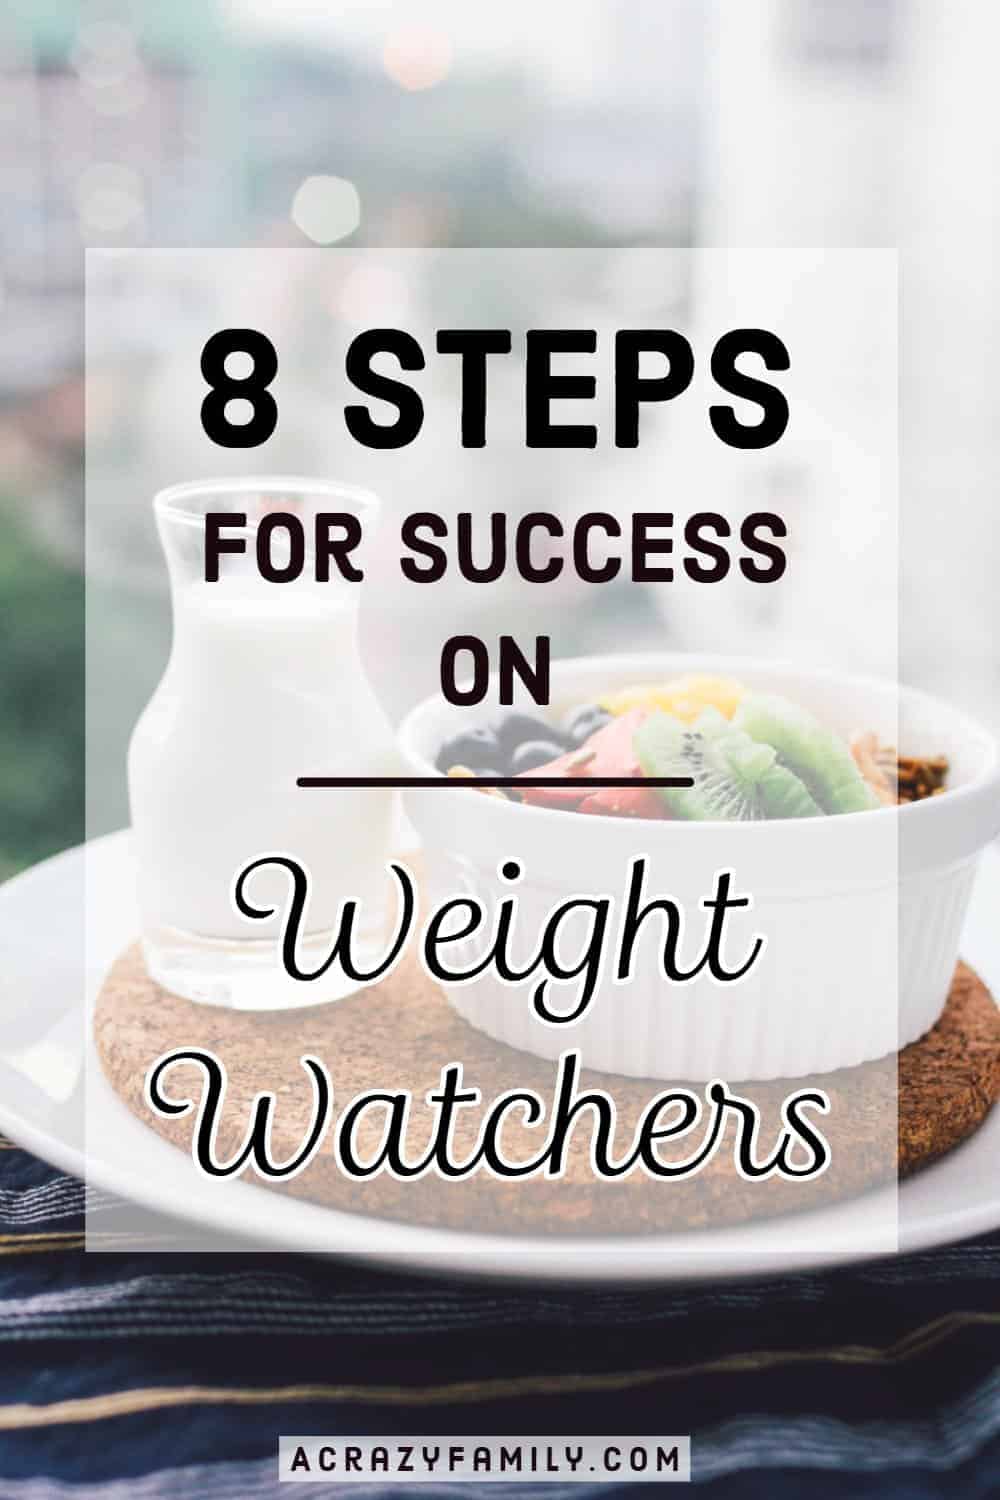 8 Steps to Take to Be Successful on Weight Watchers